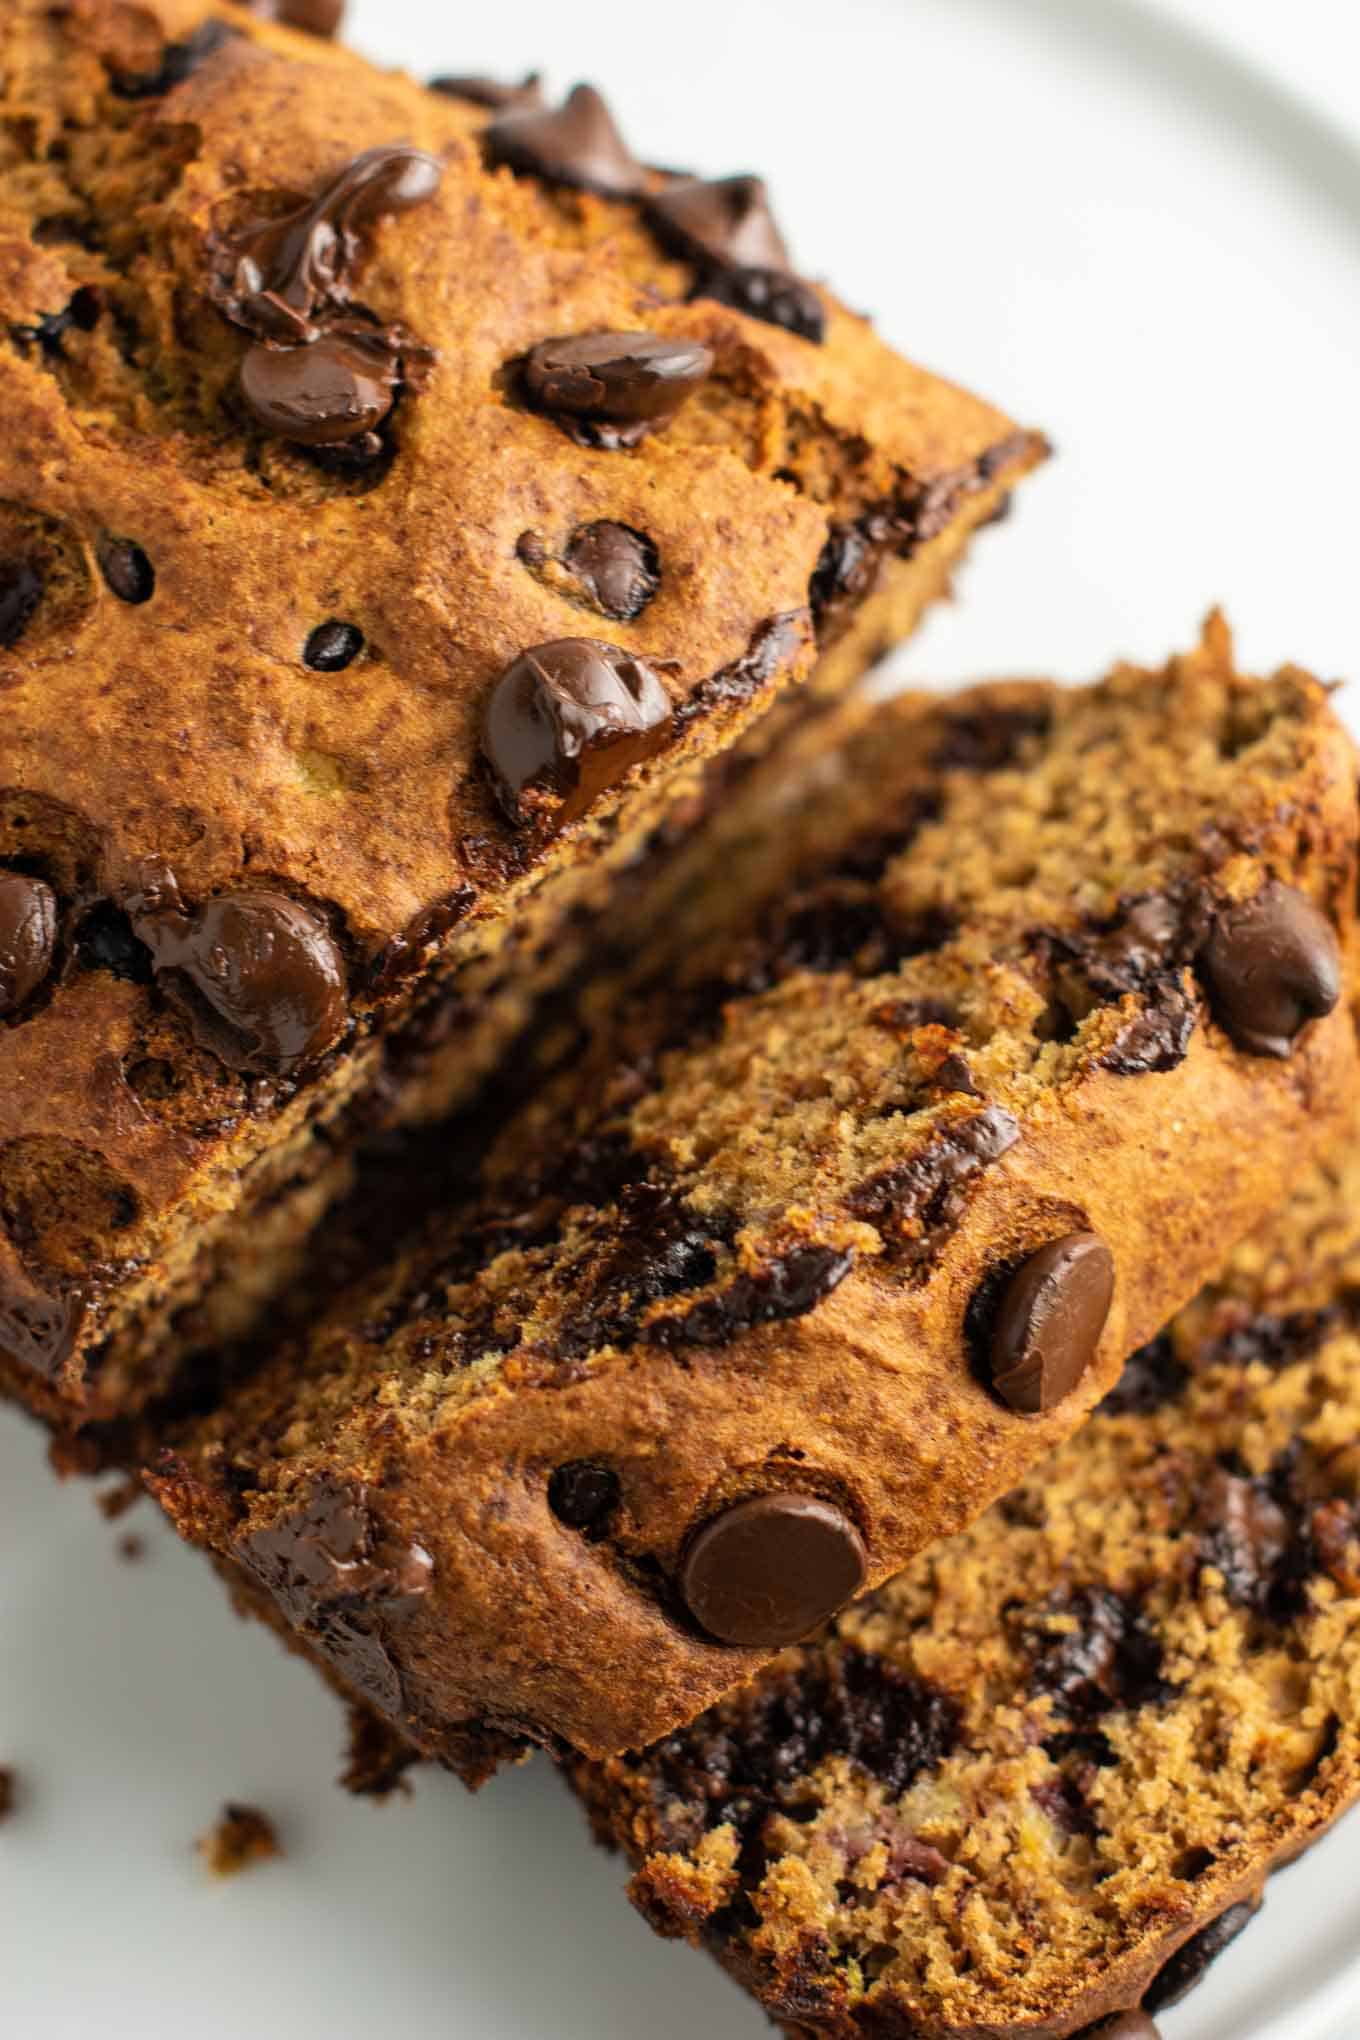 The BEST whole wheat chocolate chip banana bread – full of wholesome ingredients and NO OIL or dairy! Everyone loves it when I bake this! #wholewheat #bananabreaad 